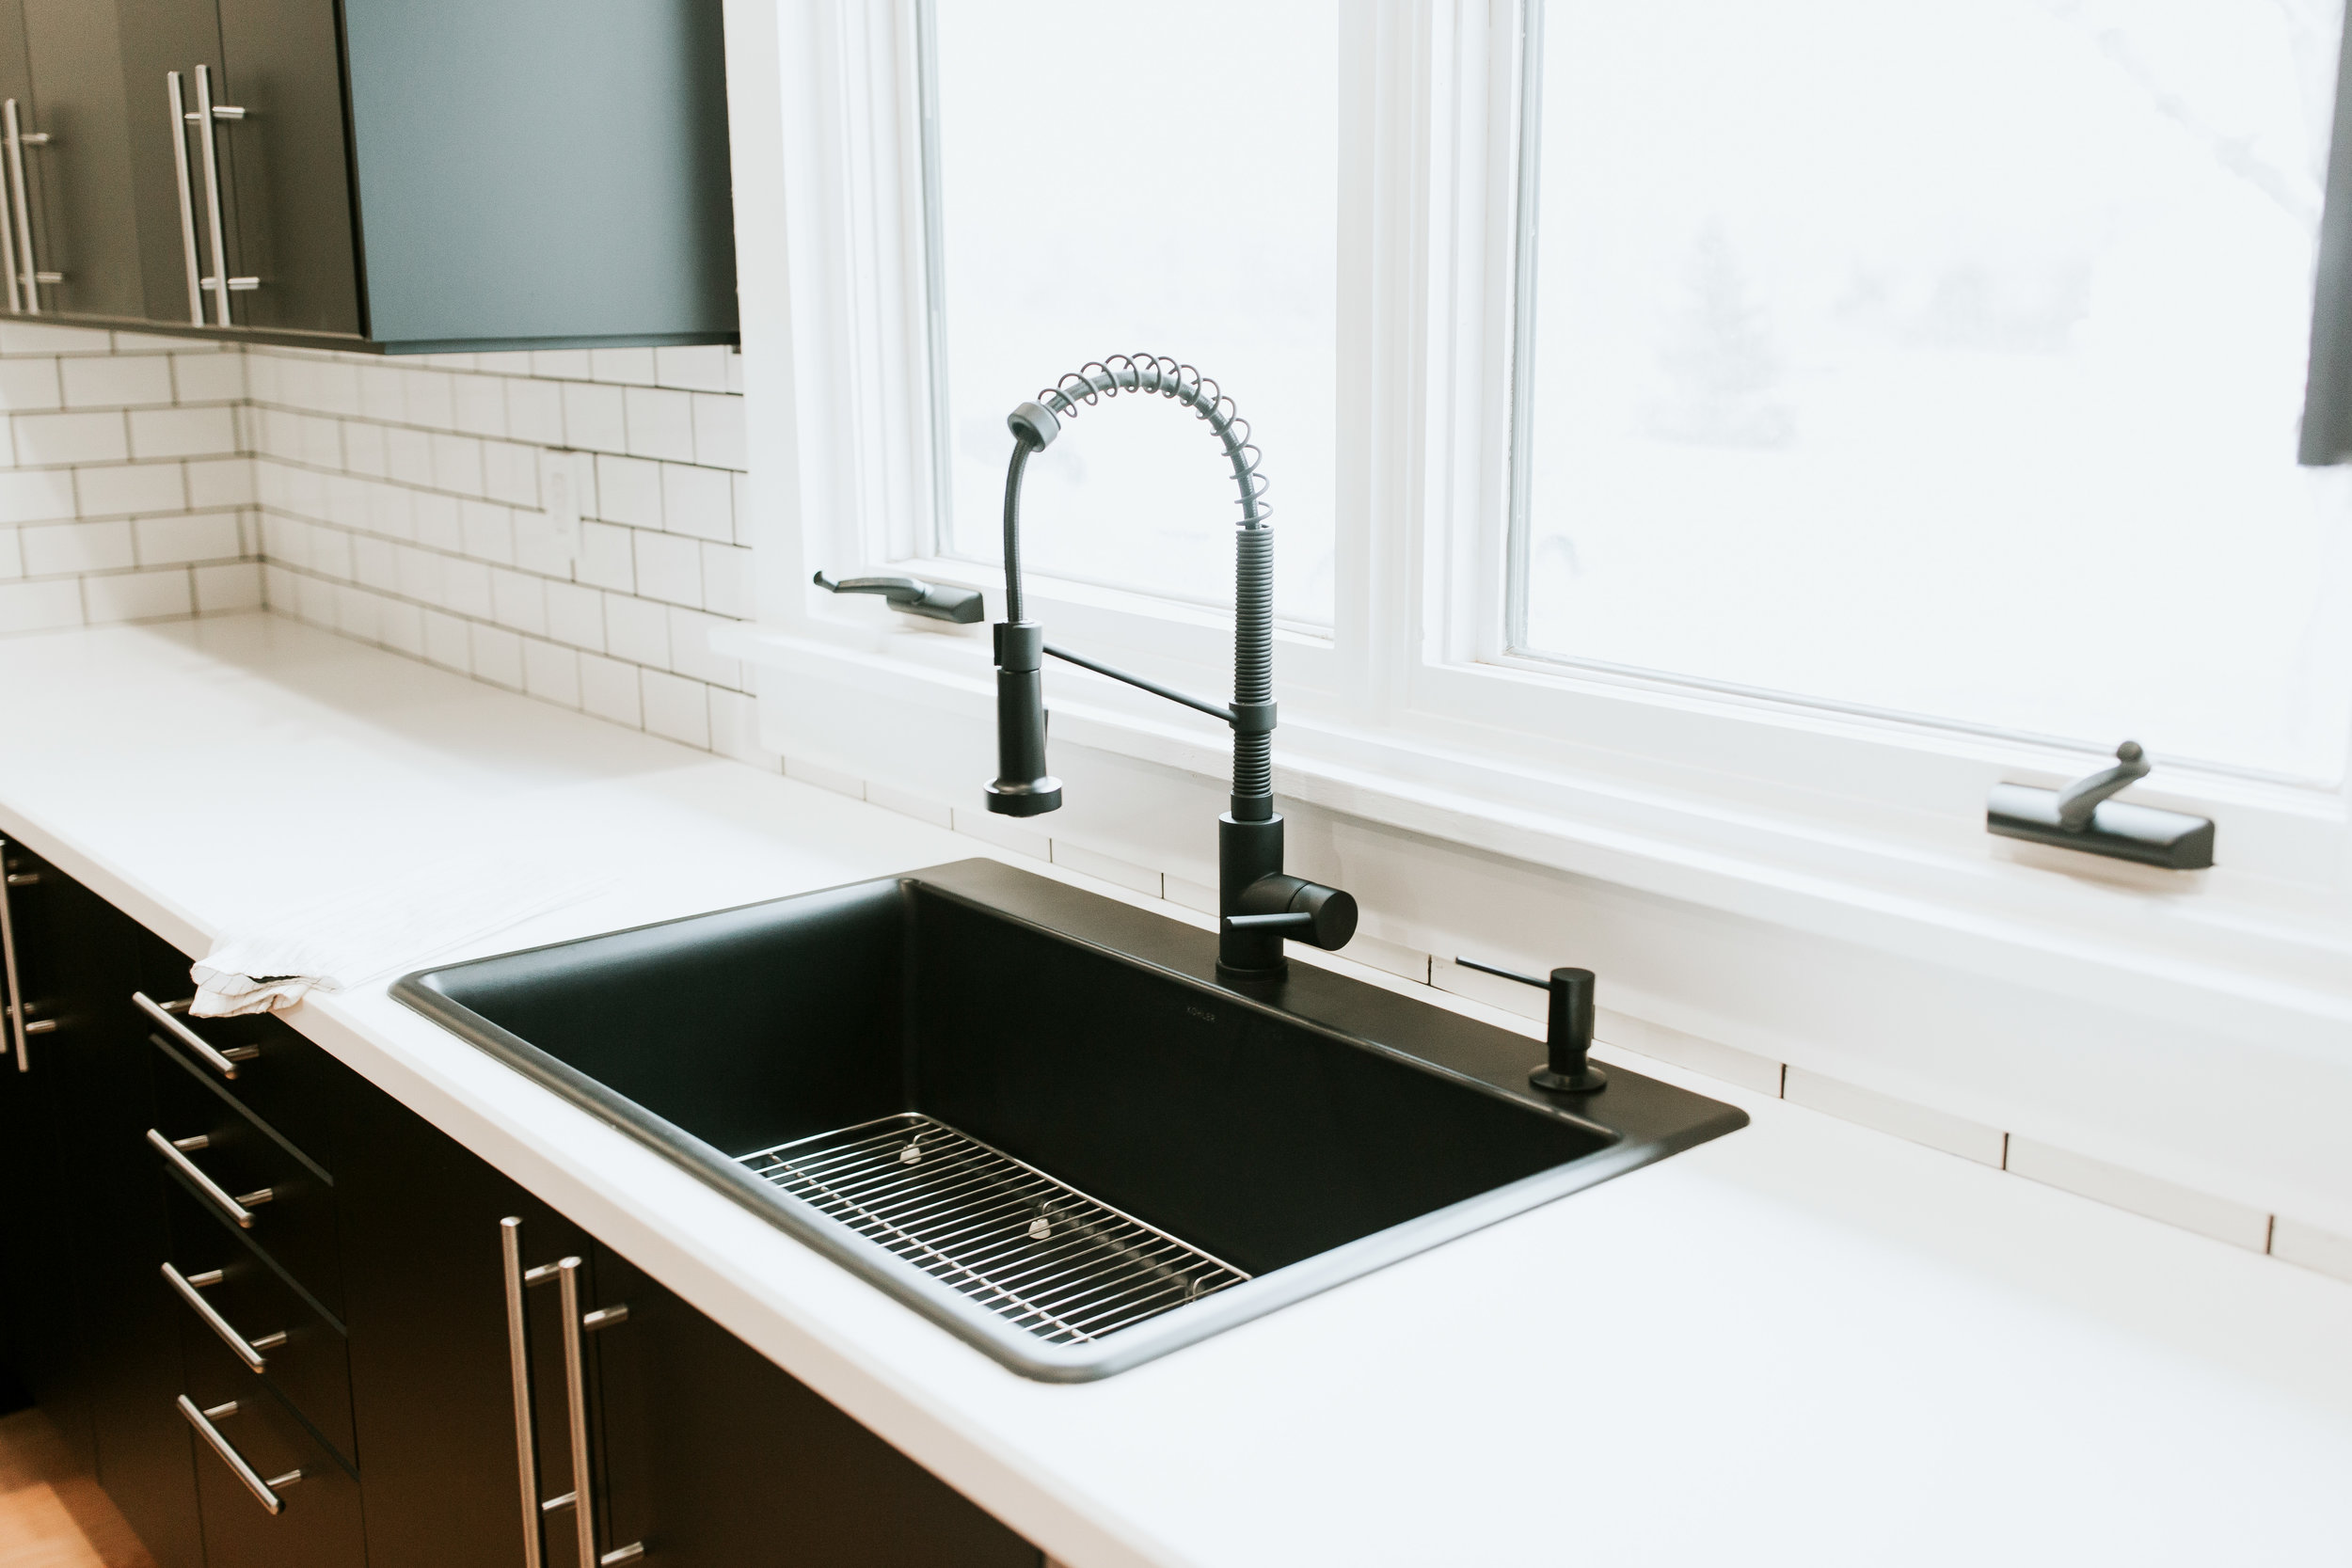 modern kitchen sources - Ikea kungsbacka cabinets, subway tile, black sink, white countertops, black faucet